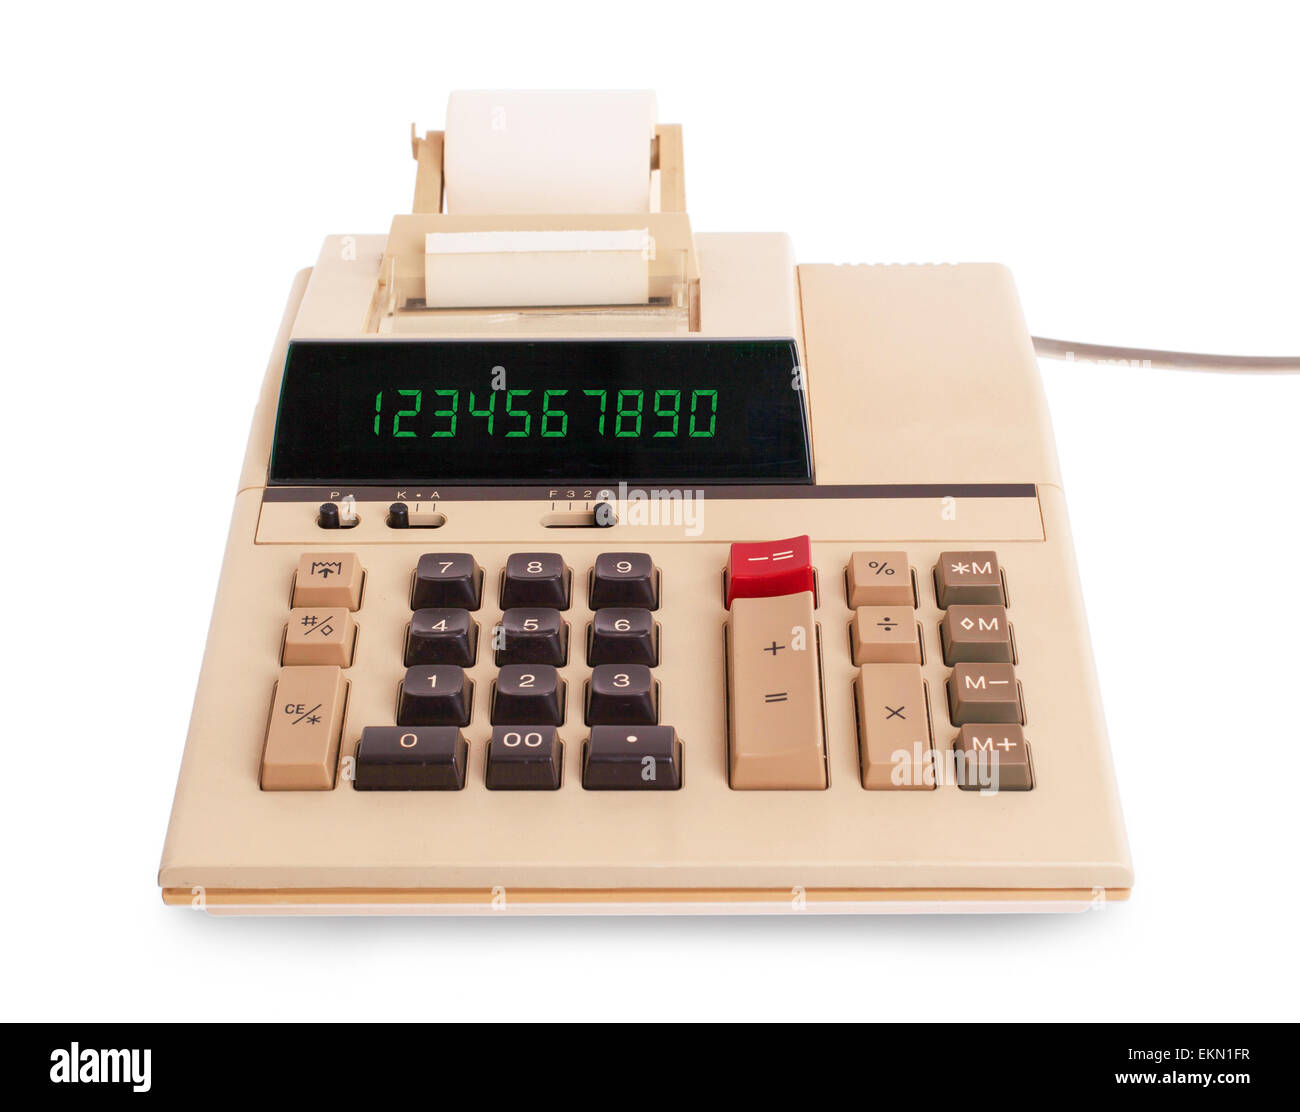 Old calculator showing a range of numbers - 1234567890 Stock Photo